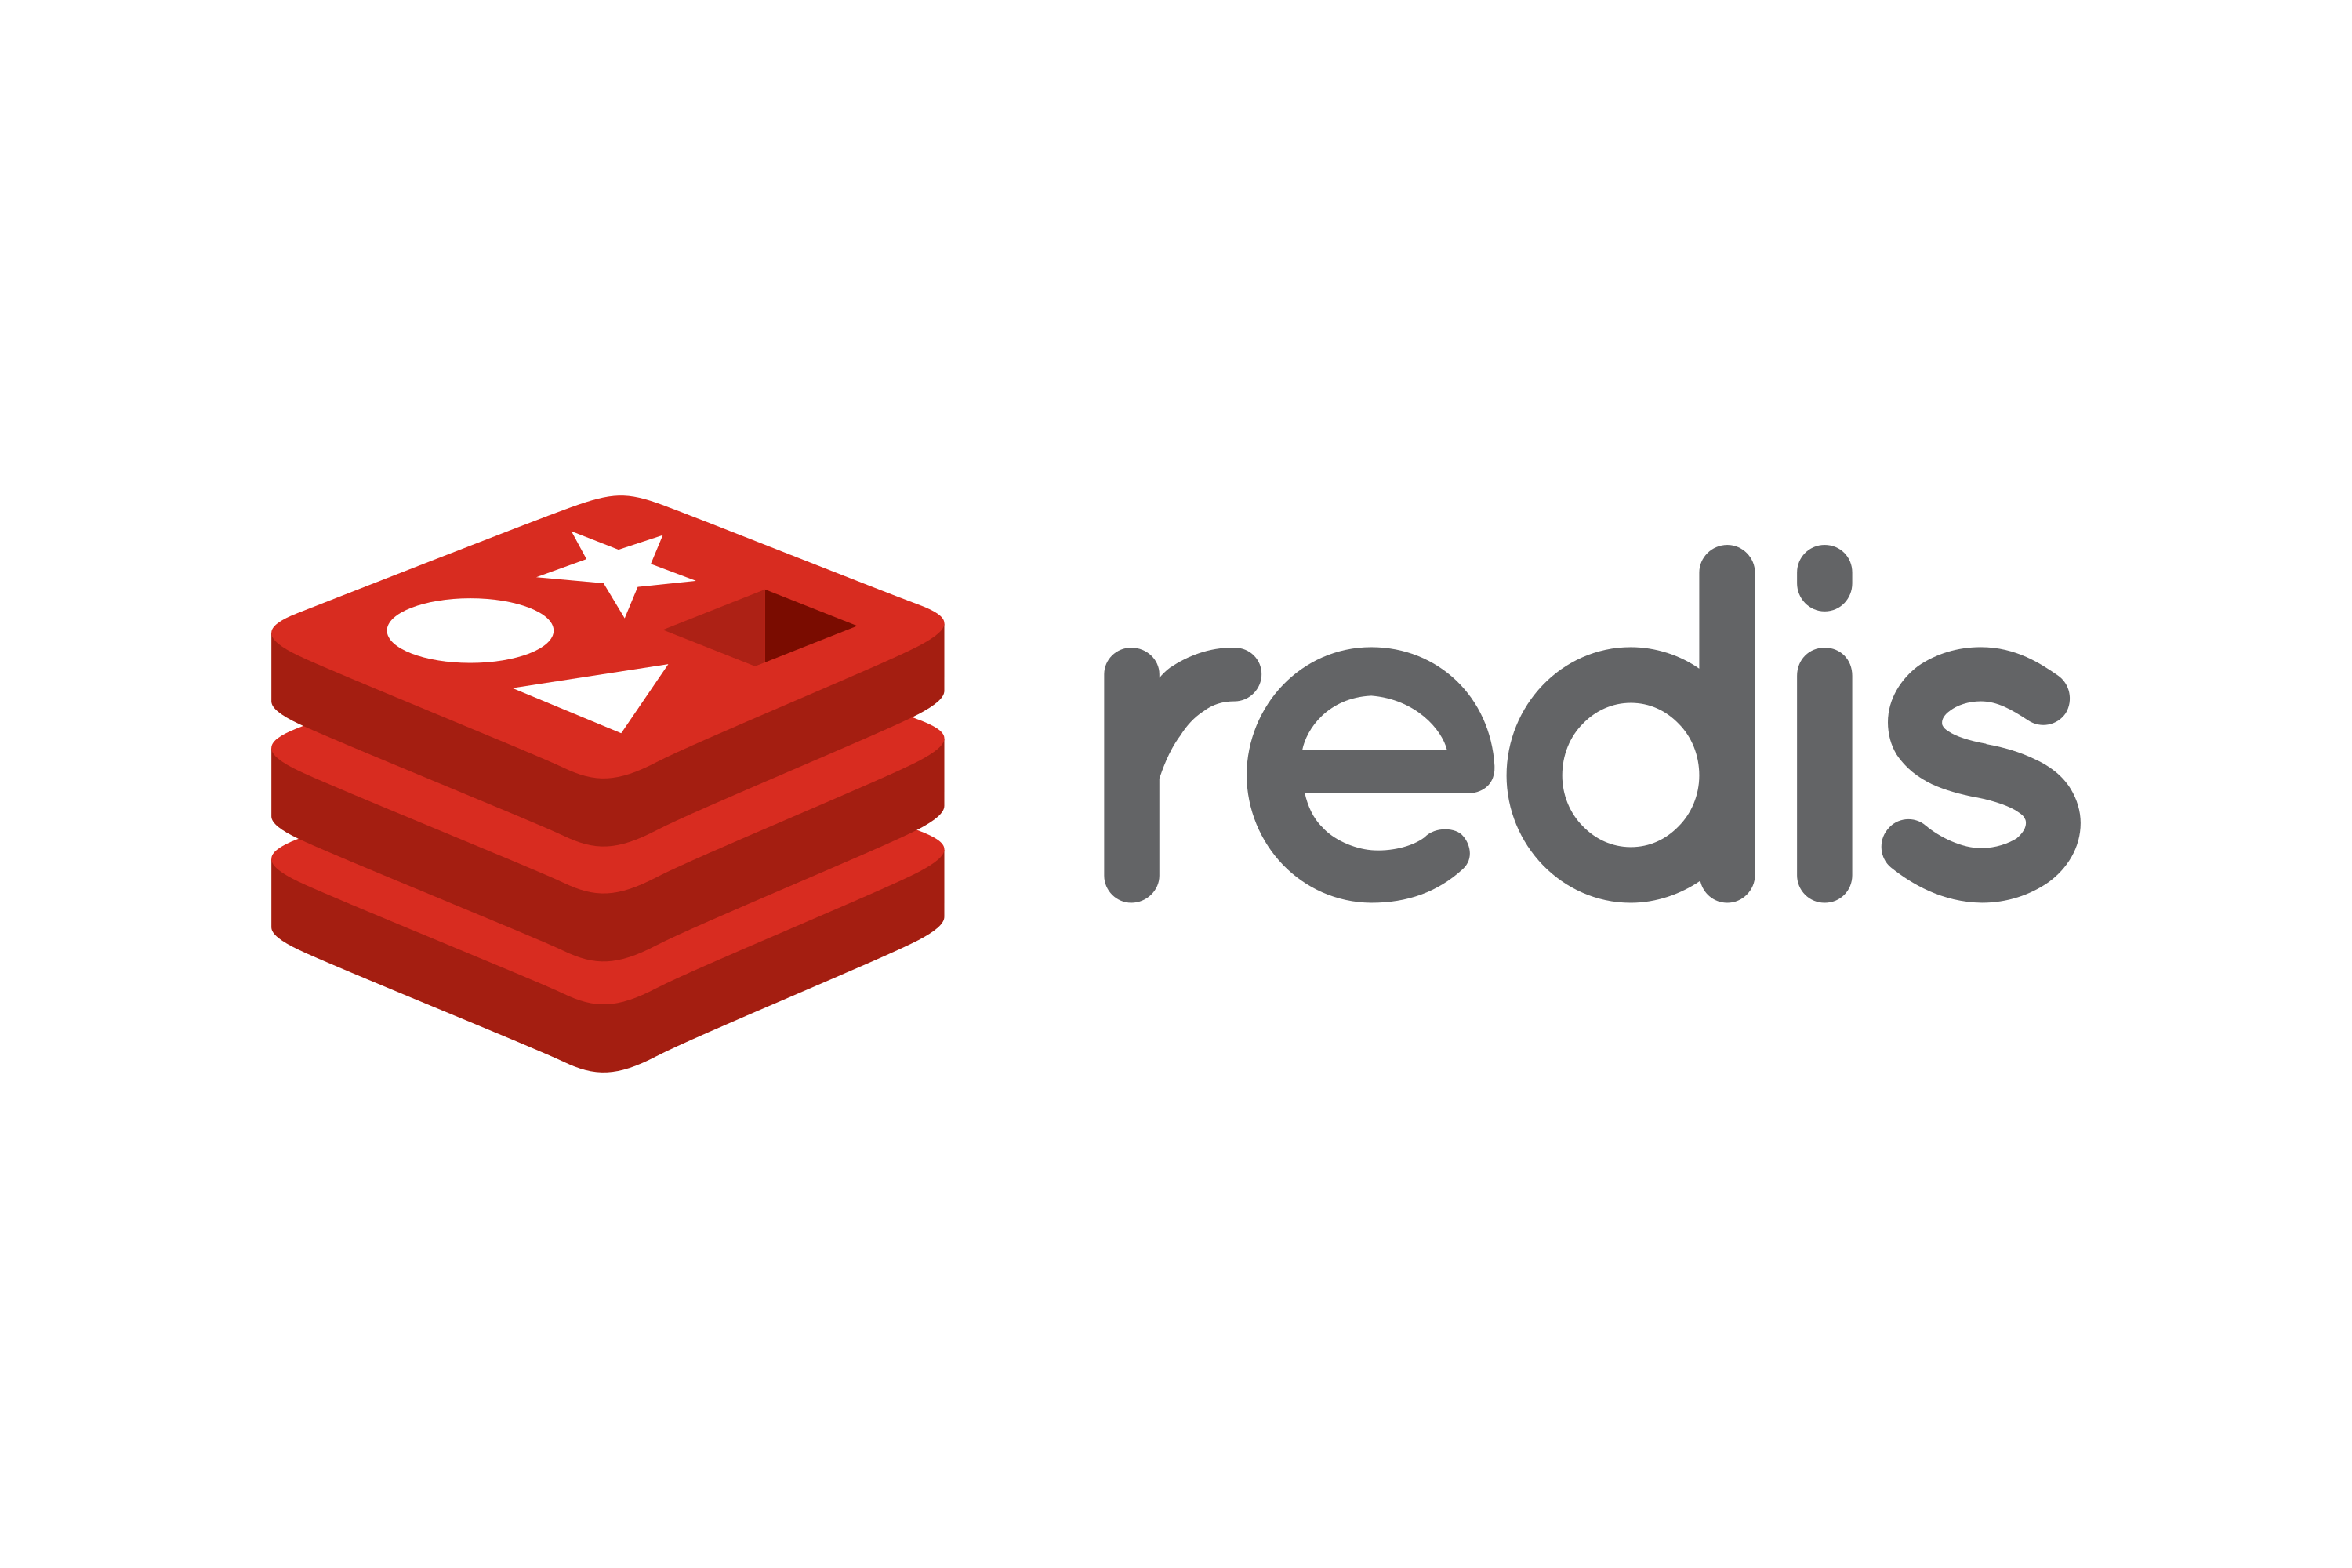 Implementing an aggressive redis caching strategy